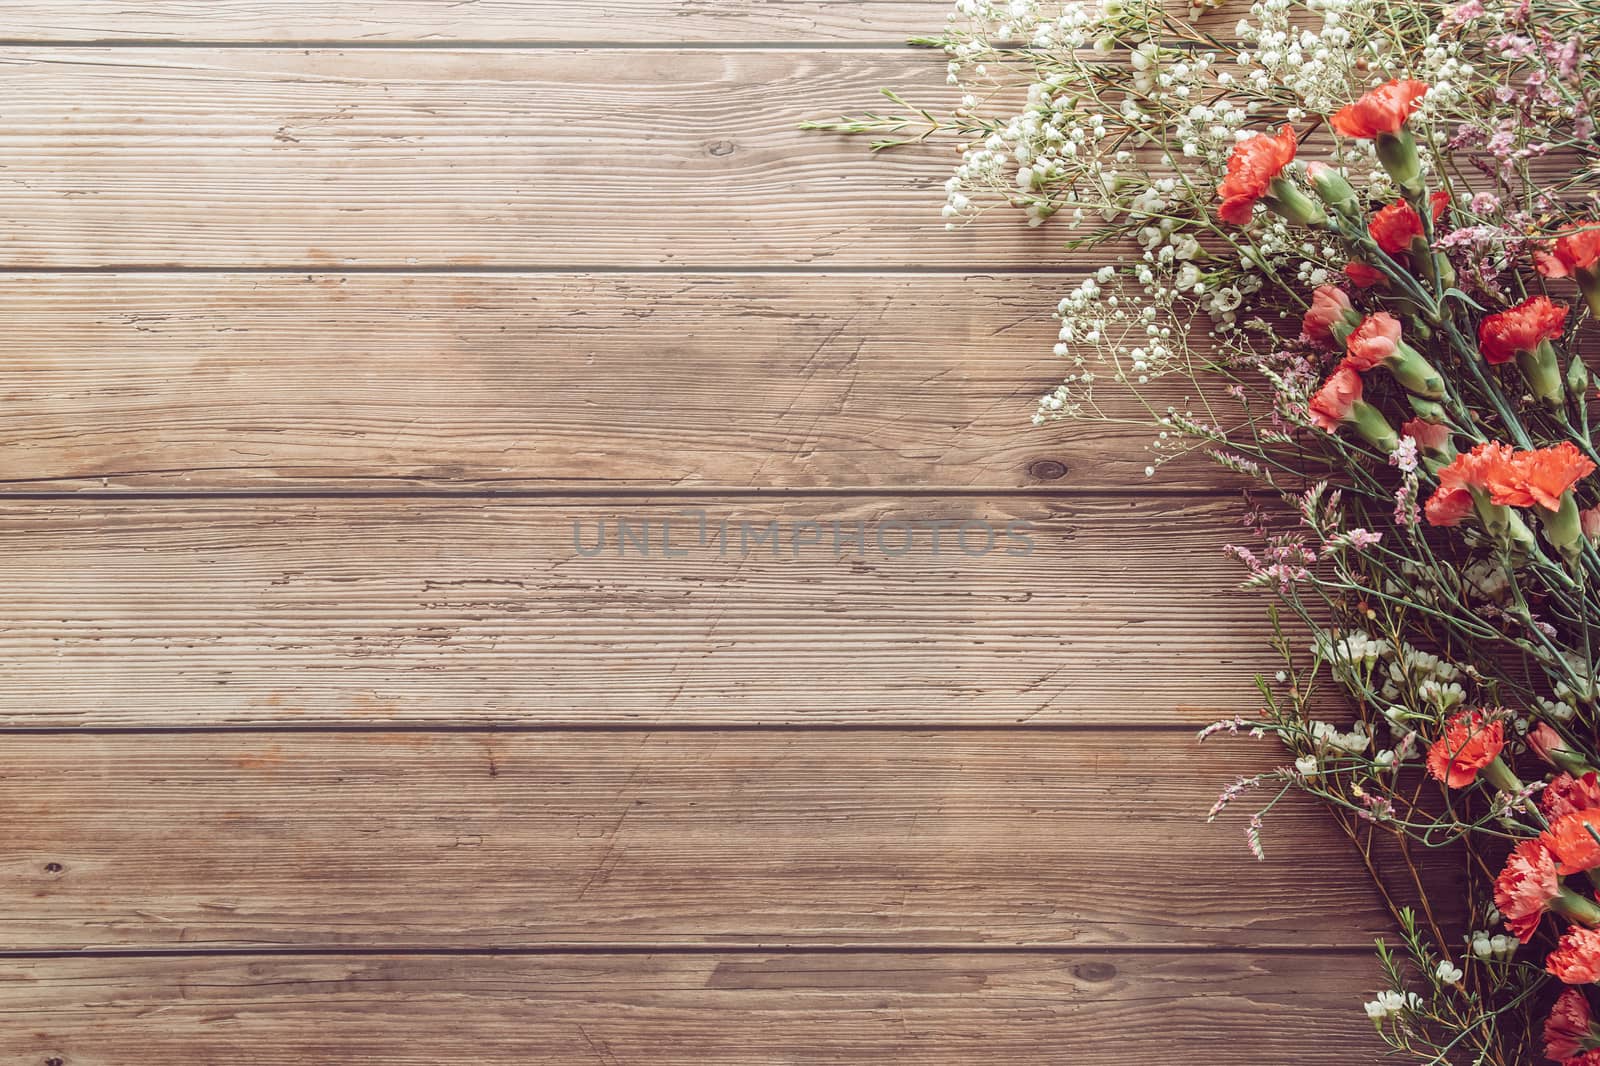 flat lay of garden spring white and red tiny flowers on wooden plank table background with copy space, retro color style by asiandelight